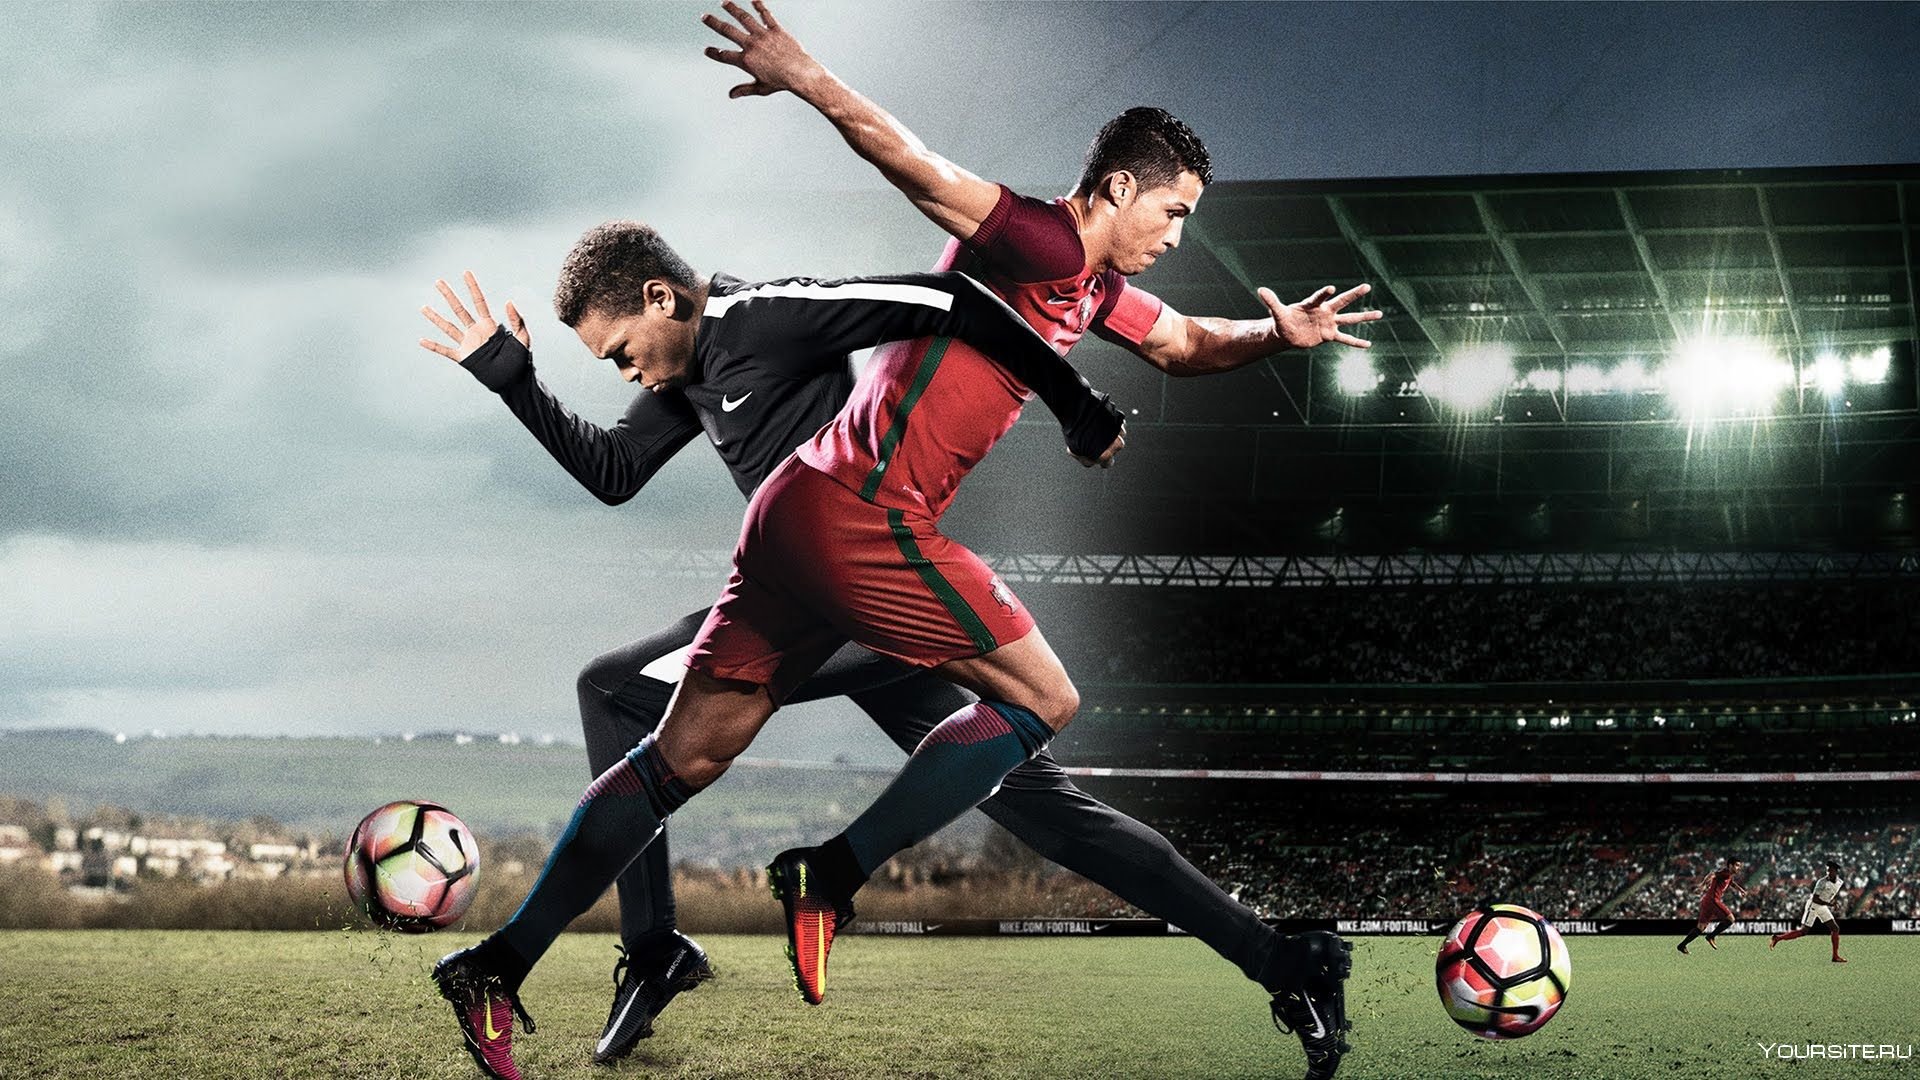 Nike Football - the Switch